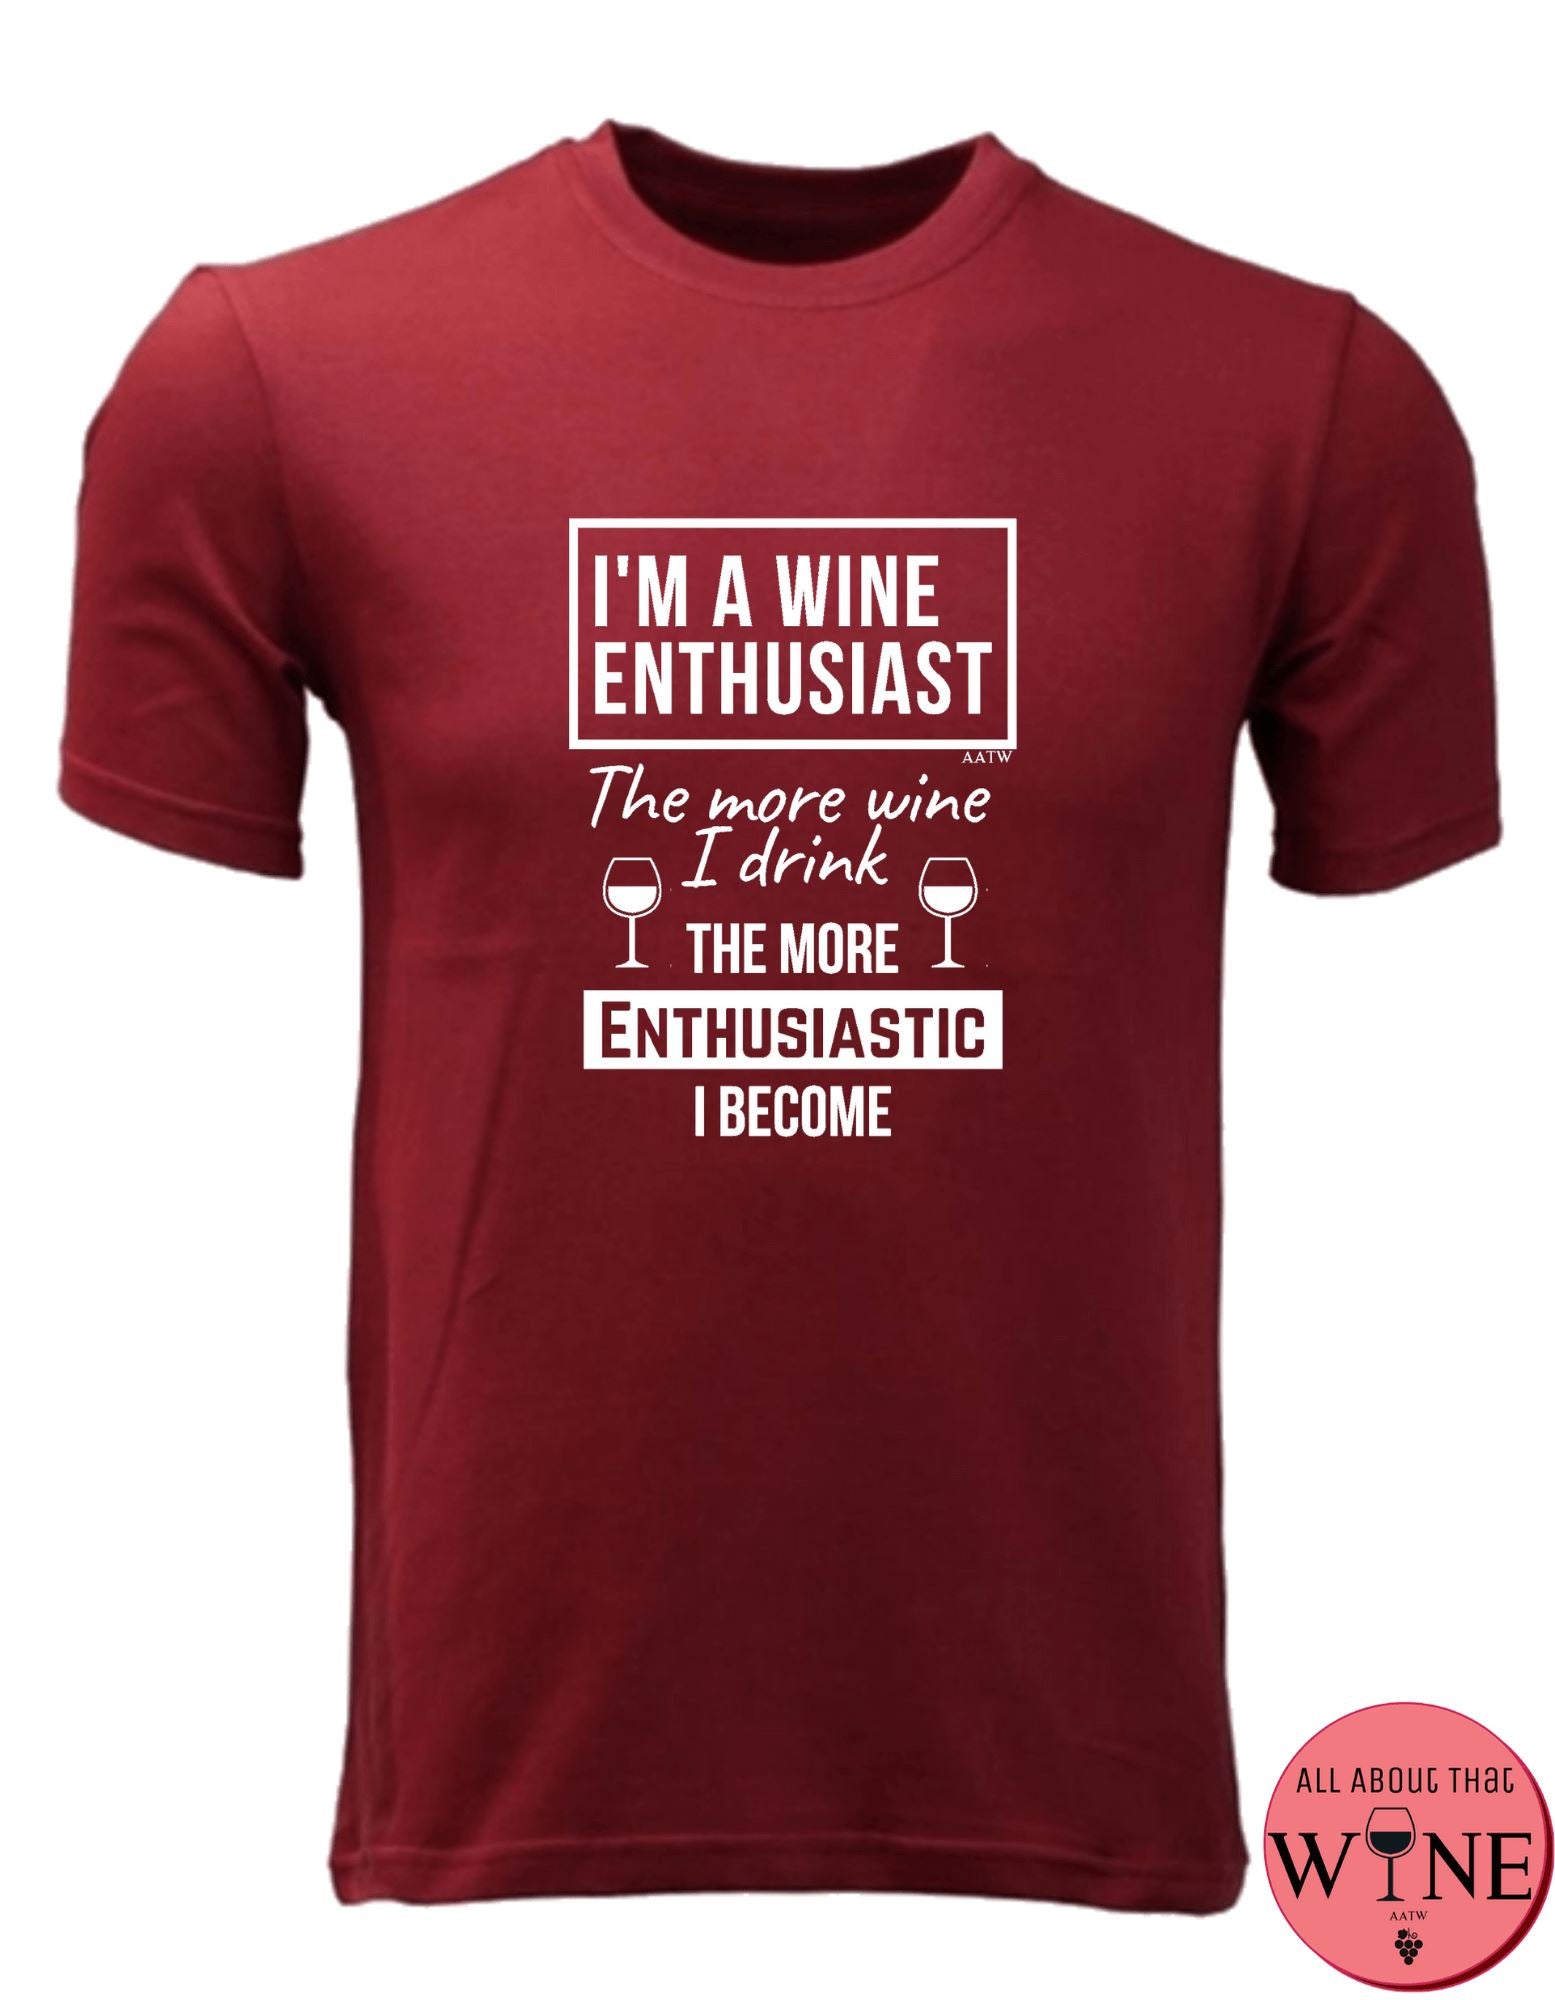 I'm A Wine Enthusiast - Men's T-shirt S Deep red with white